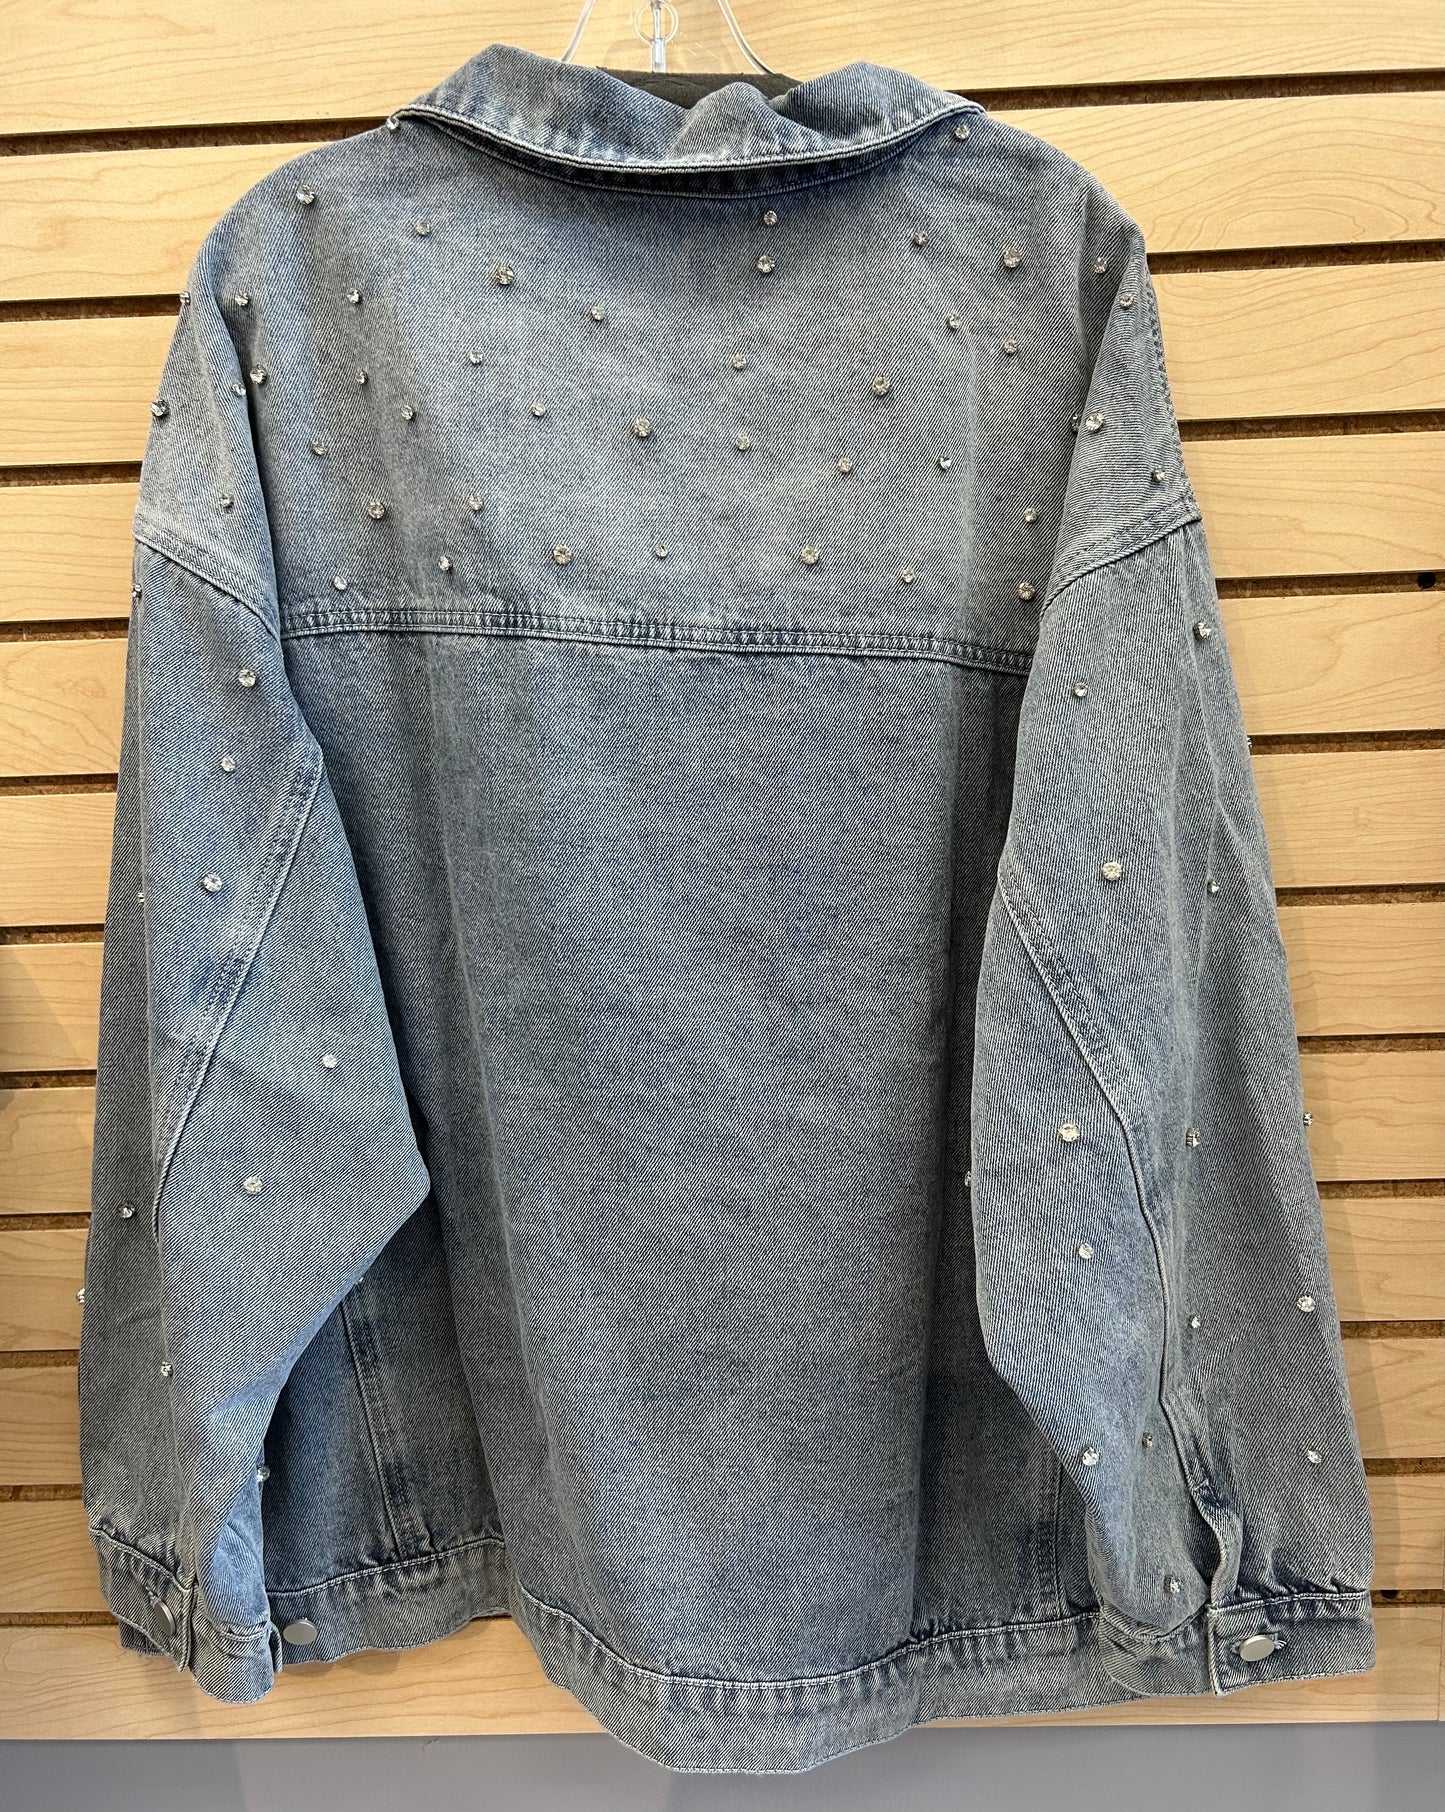 Plus size denim jacket with crystals all over